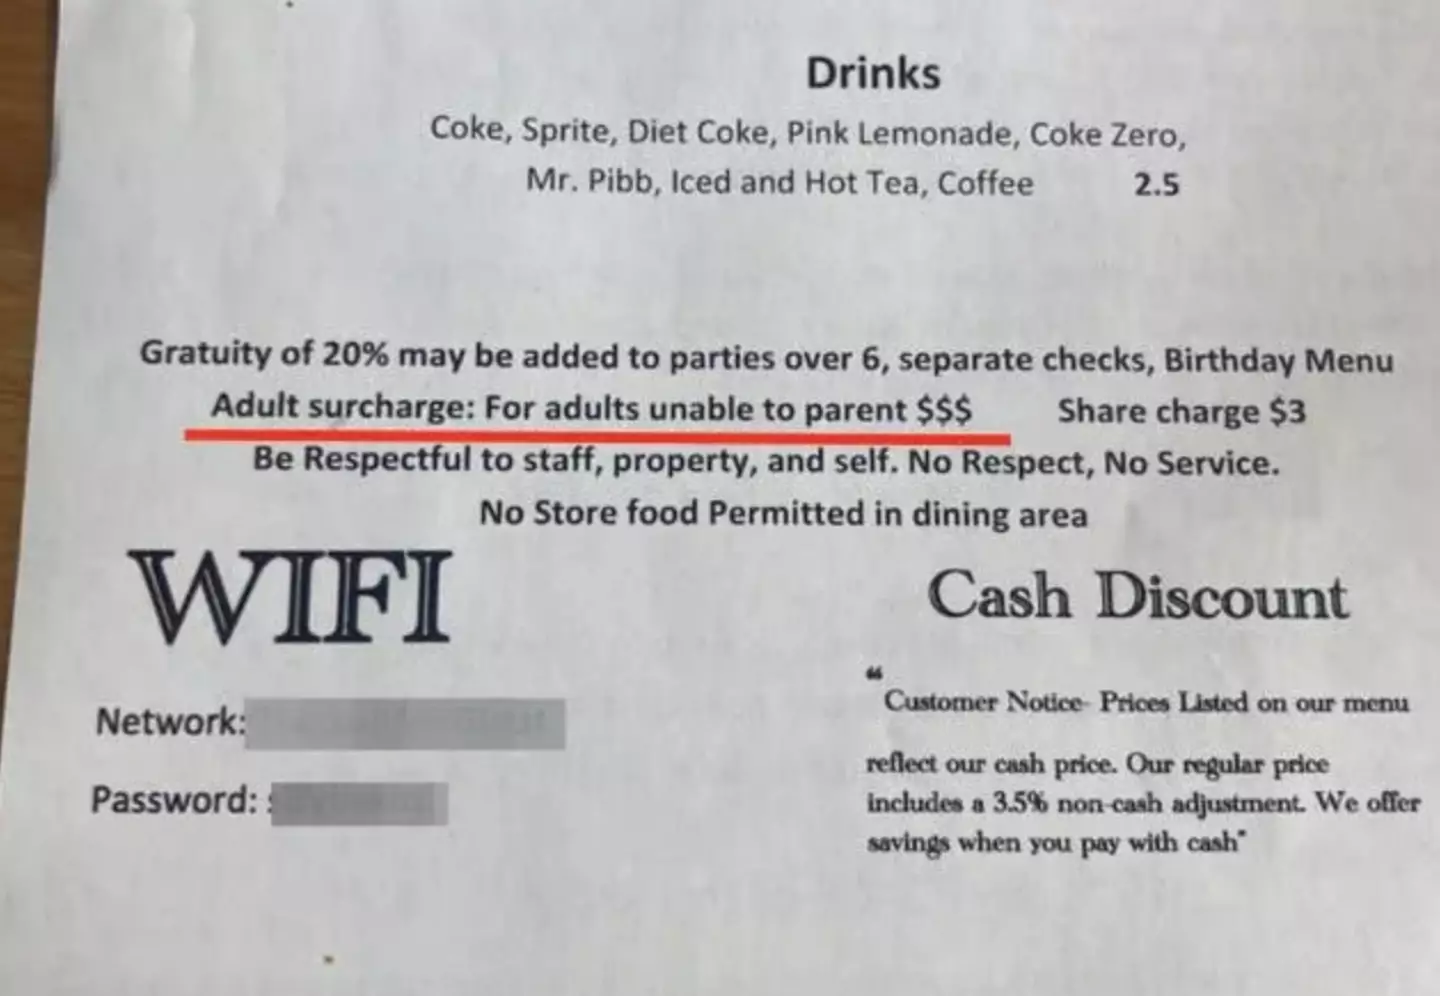 The menu stated the fee would be charged to 'adults unable to parent'.